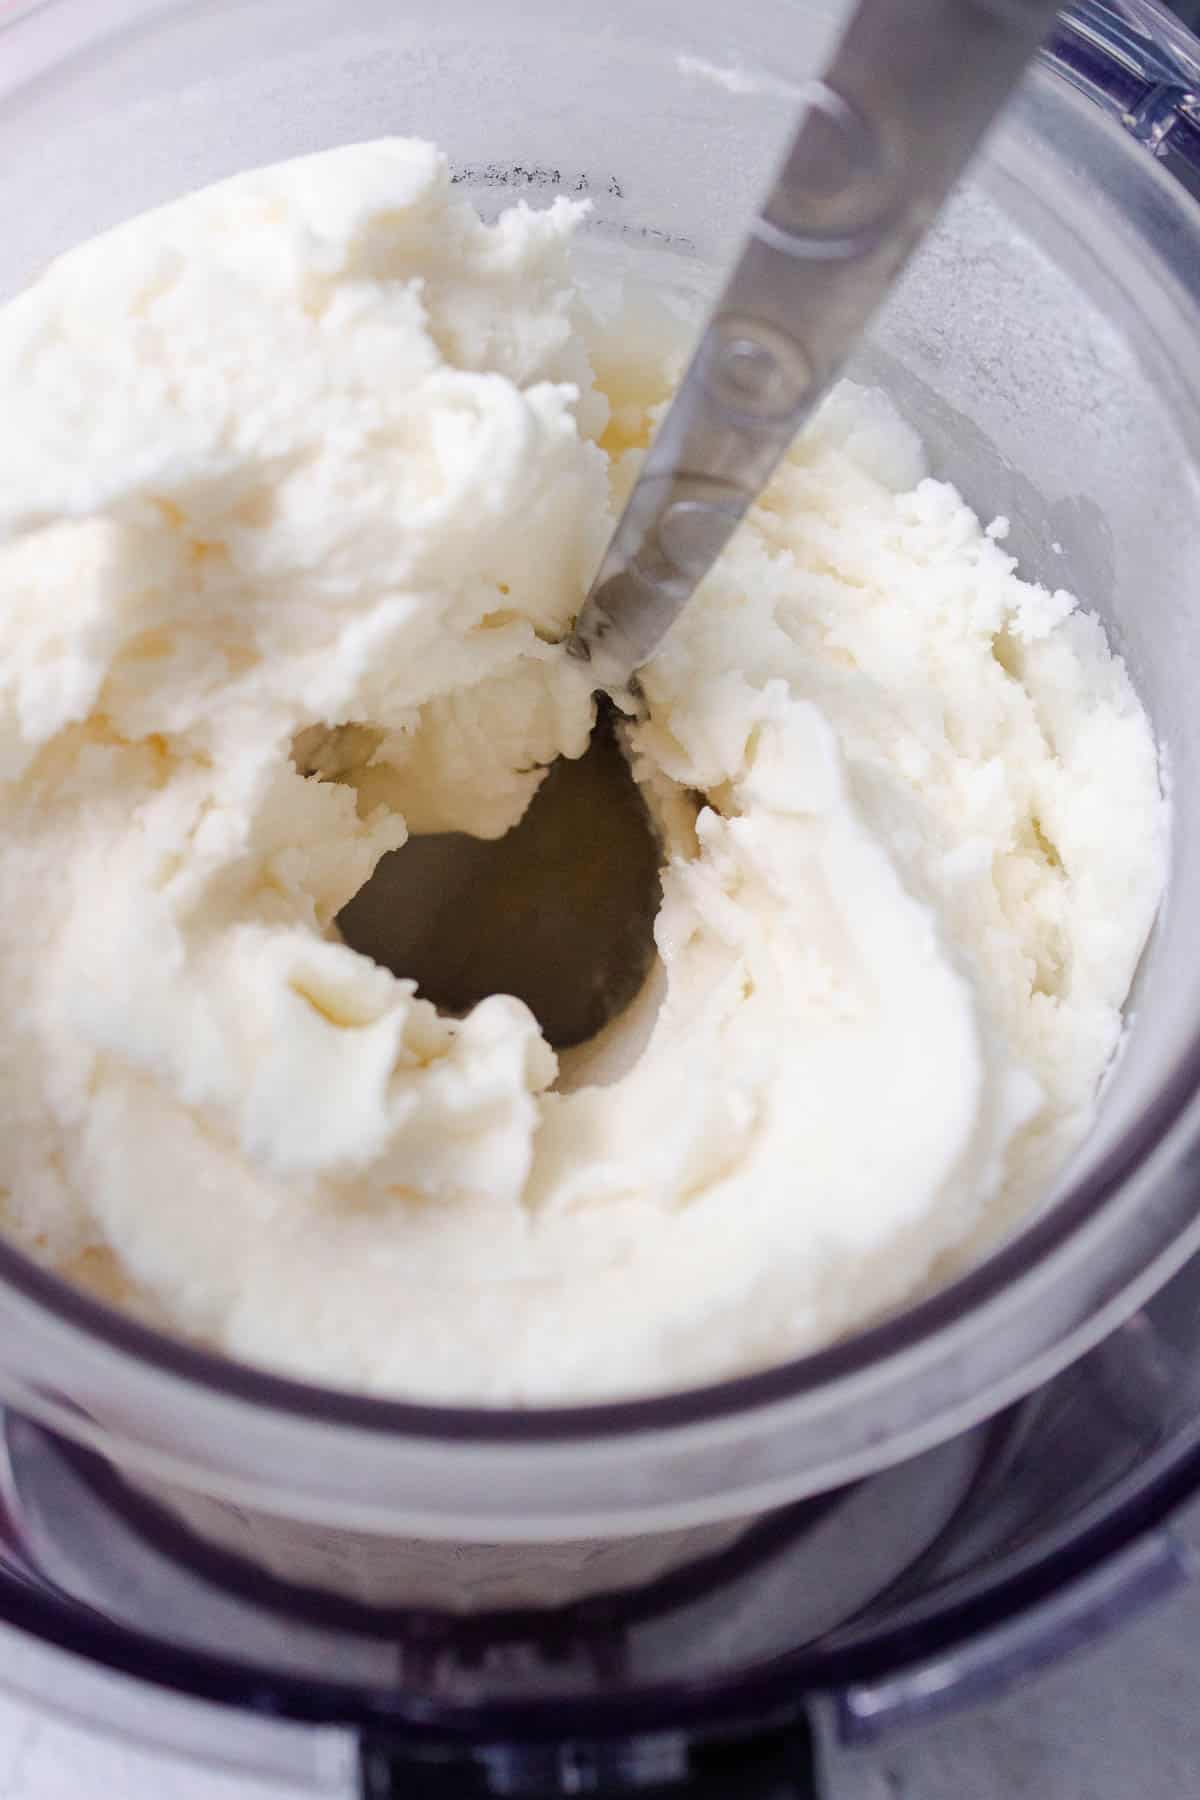 A hole is dug into the center of the vanilla ice cream pint using a spoon